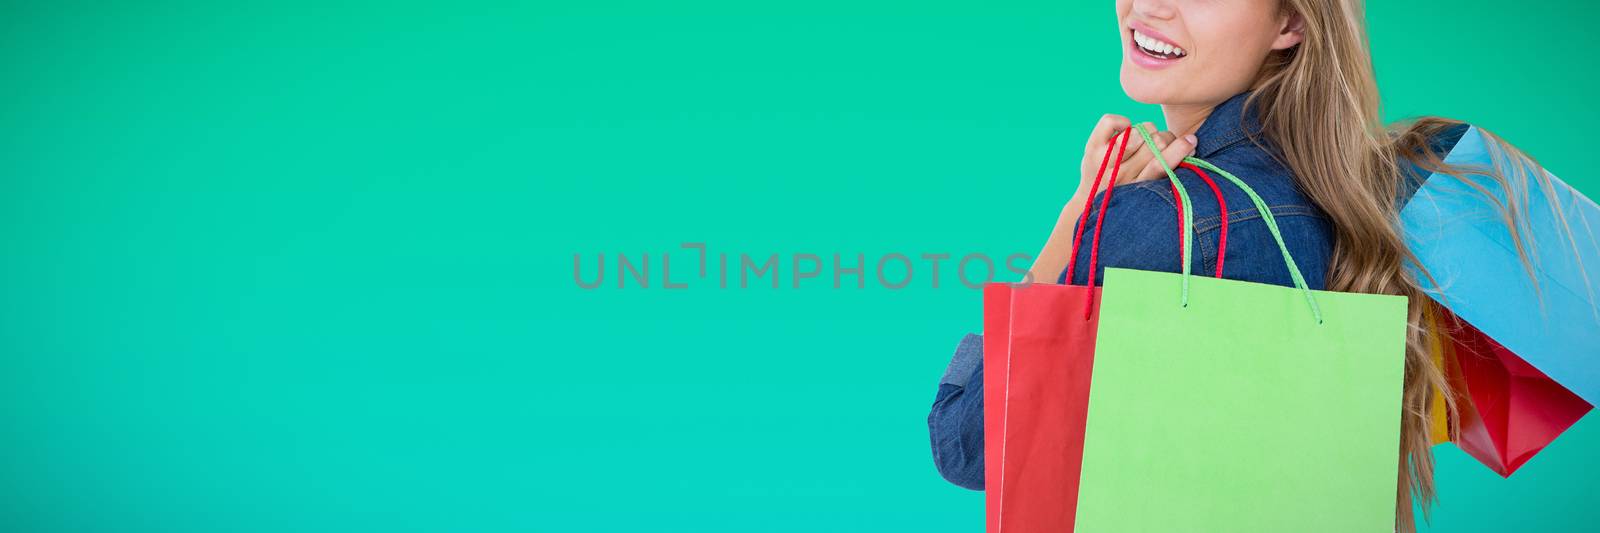 Woman holding shopping bags against abstract green background